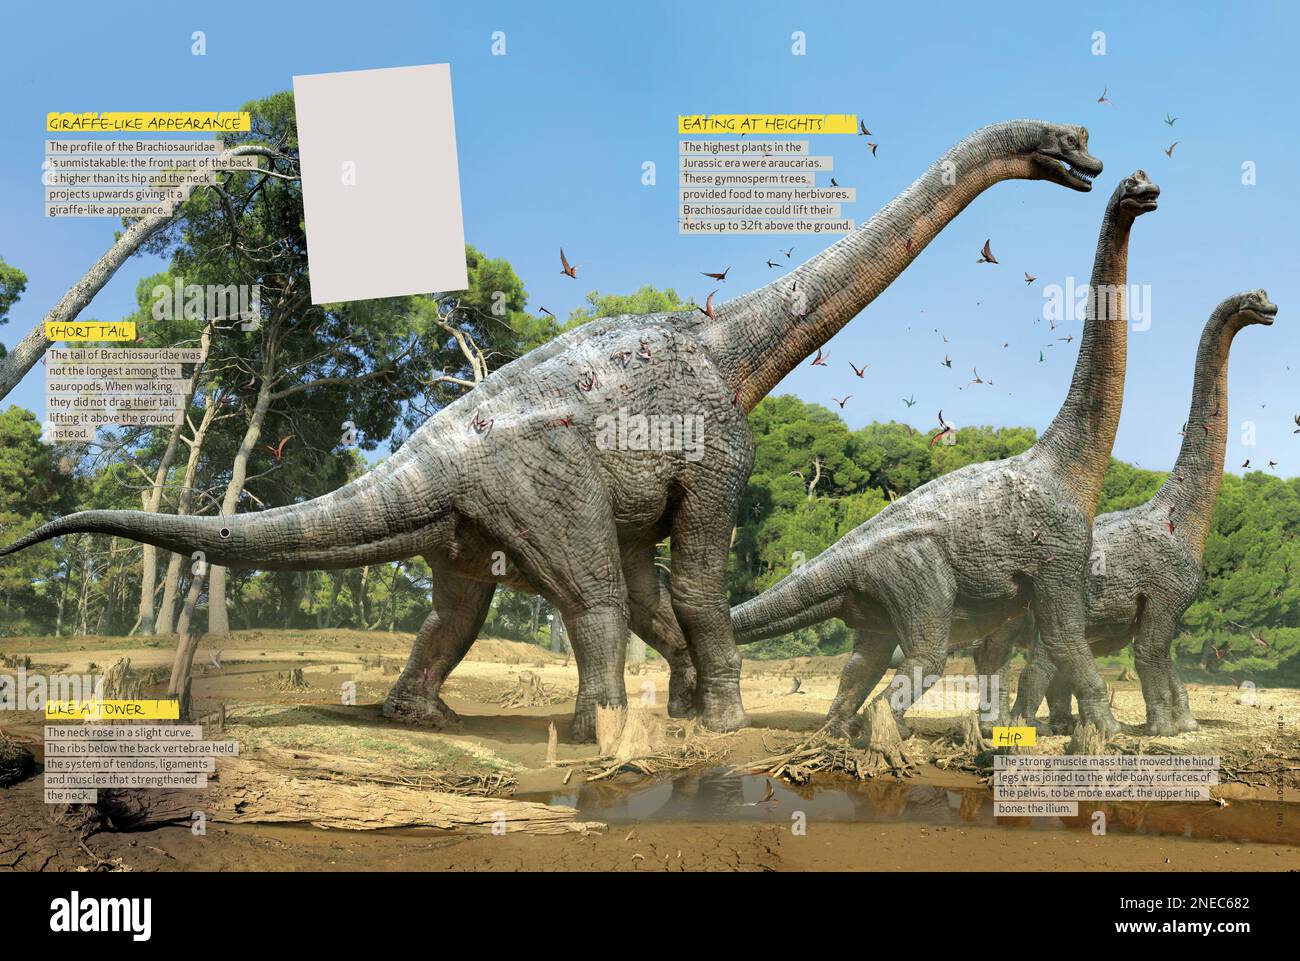 Infographics about the distinctive characteristics and alimentary habits of the Brachiosaurus, a herbivorous dinosaur from the Jurassic period. [QuarkXPress (.qxp); 4842x3248]. Stock Photo